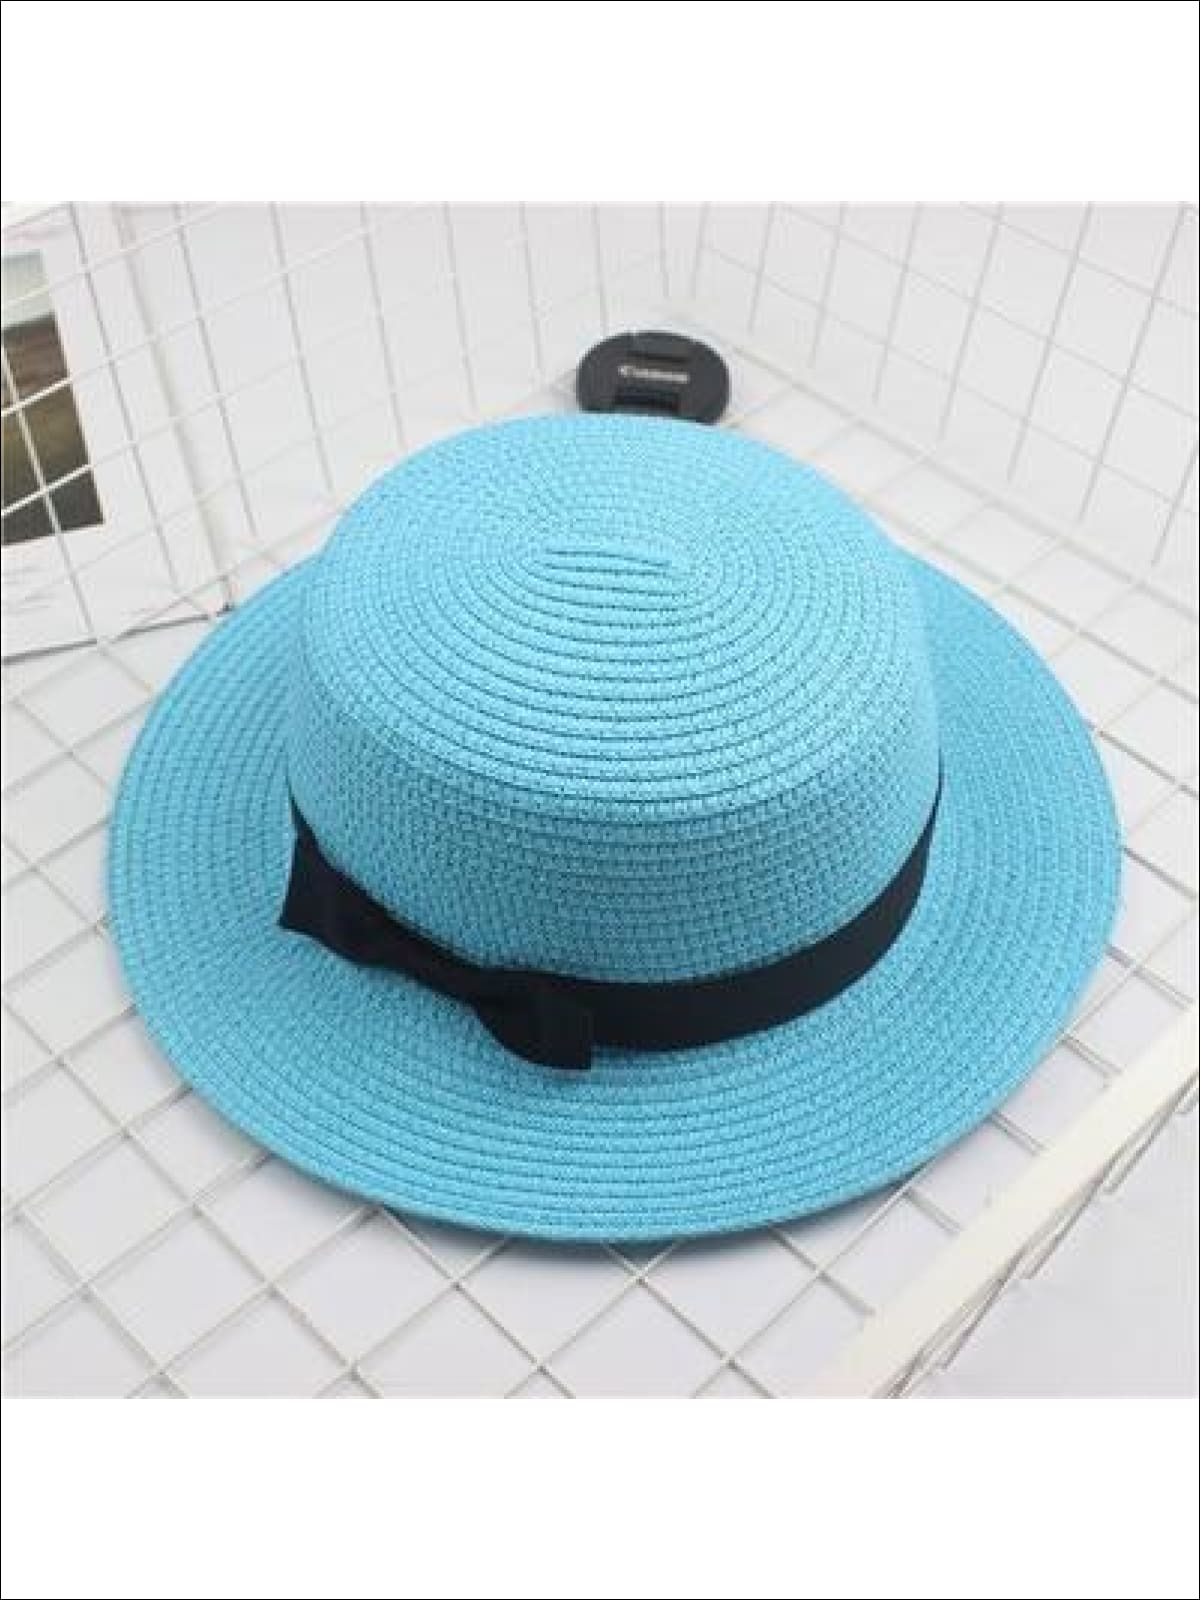 Girls Woven Straw Fedora Hat with Bow Tie (Multiple Color Options) - Aqua / One Size - Girls Hats